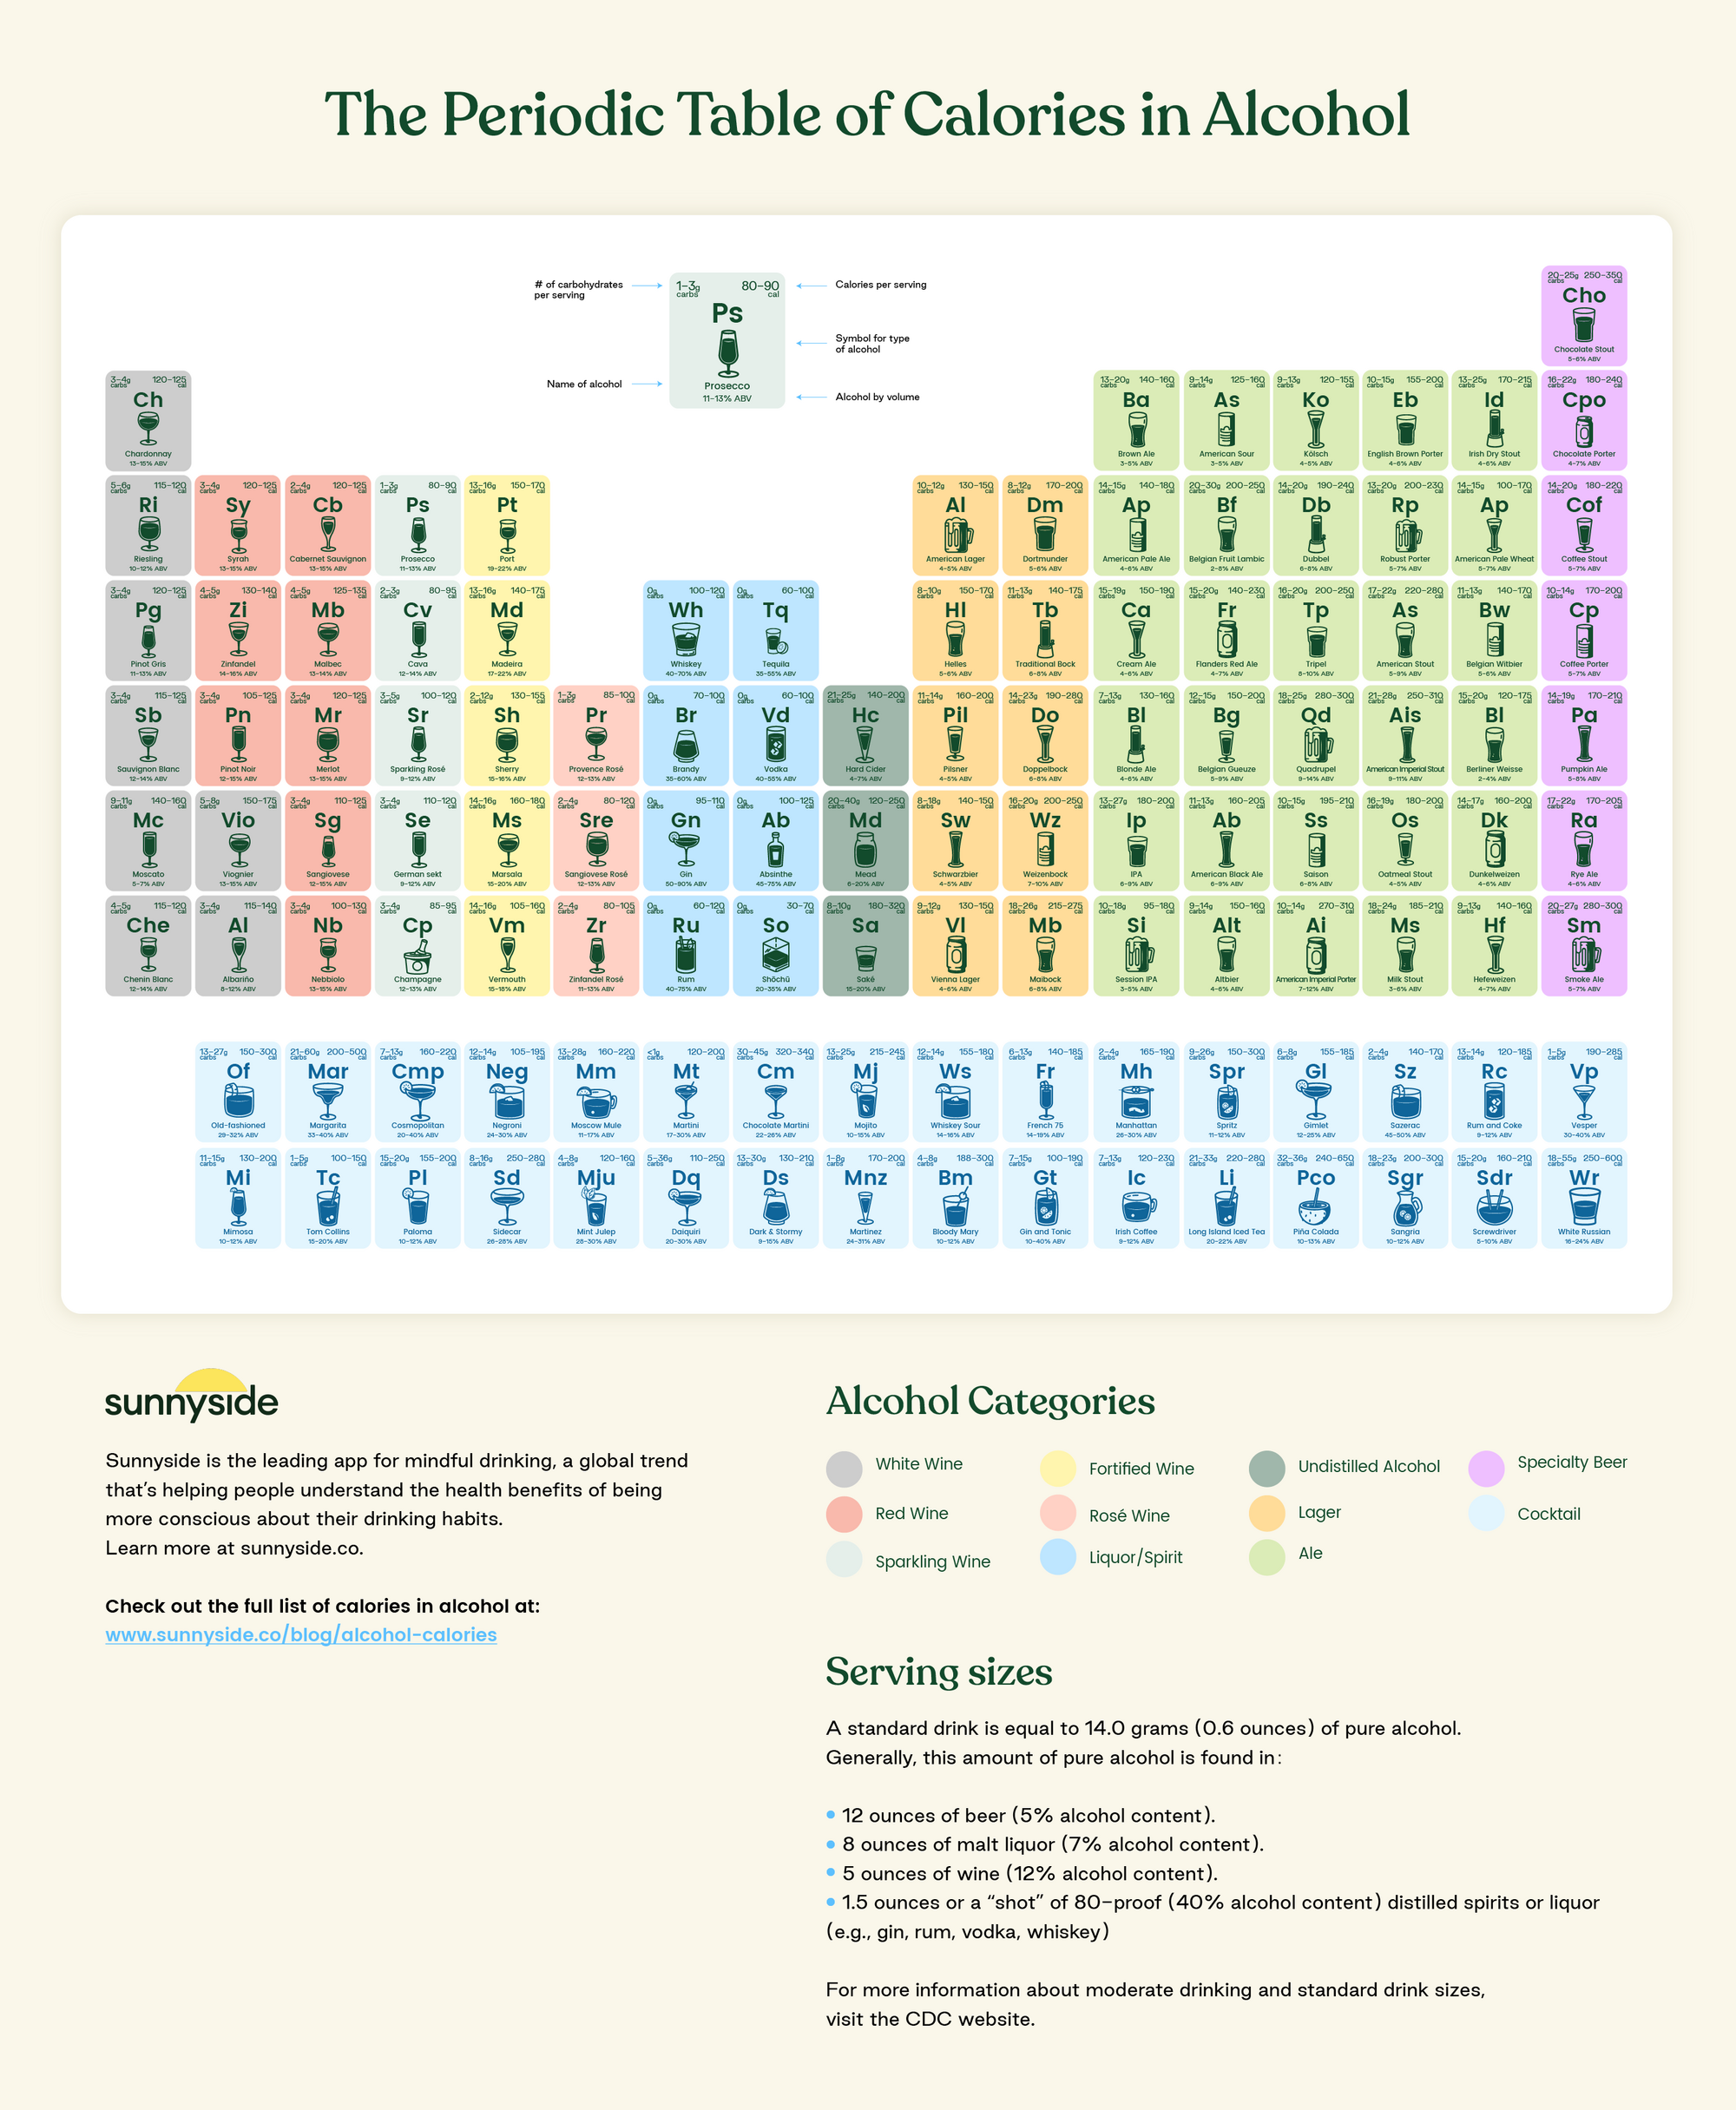 The Periodic Table of Calories in Alcohol - Infographic